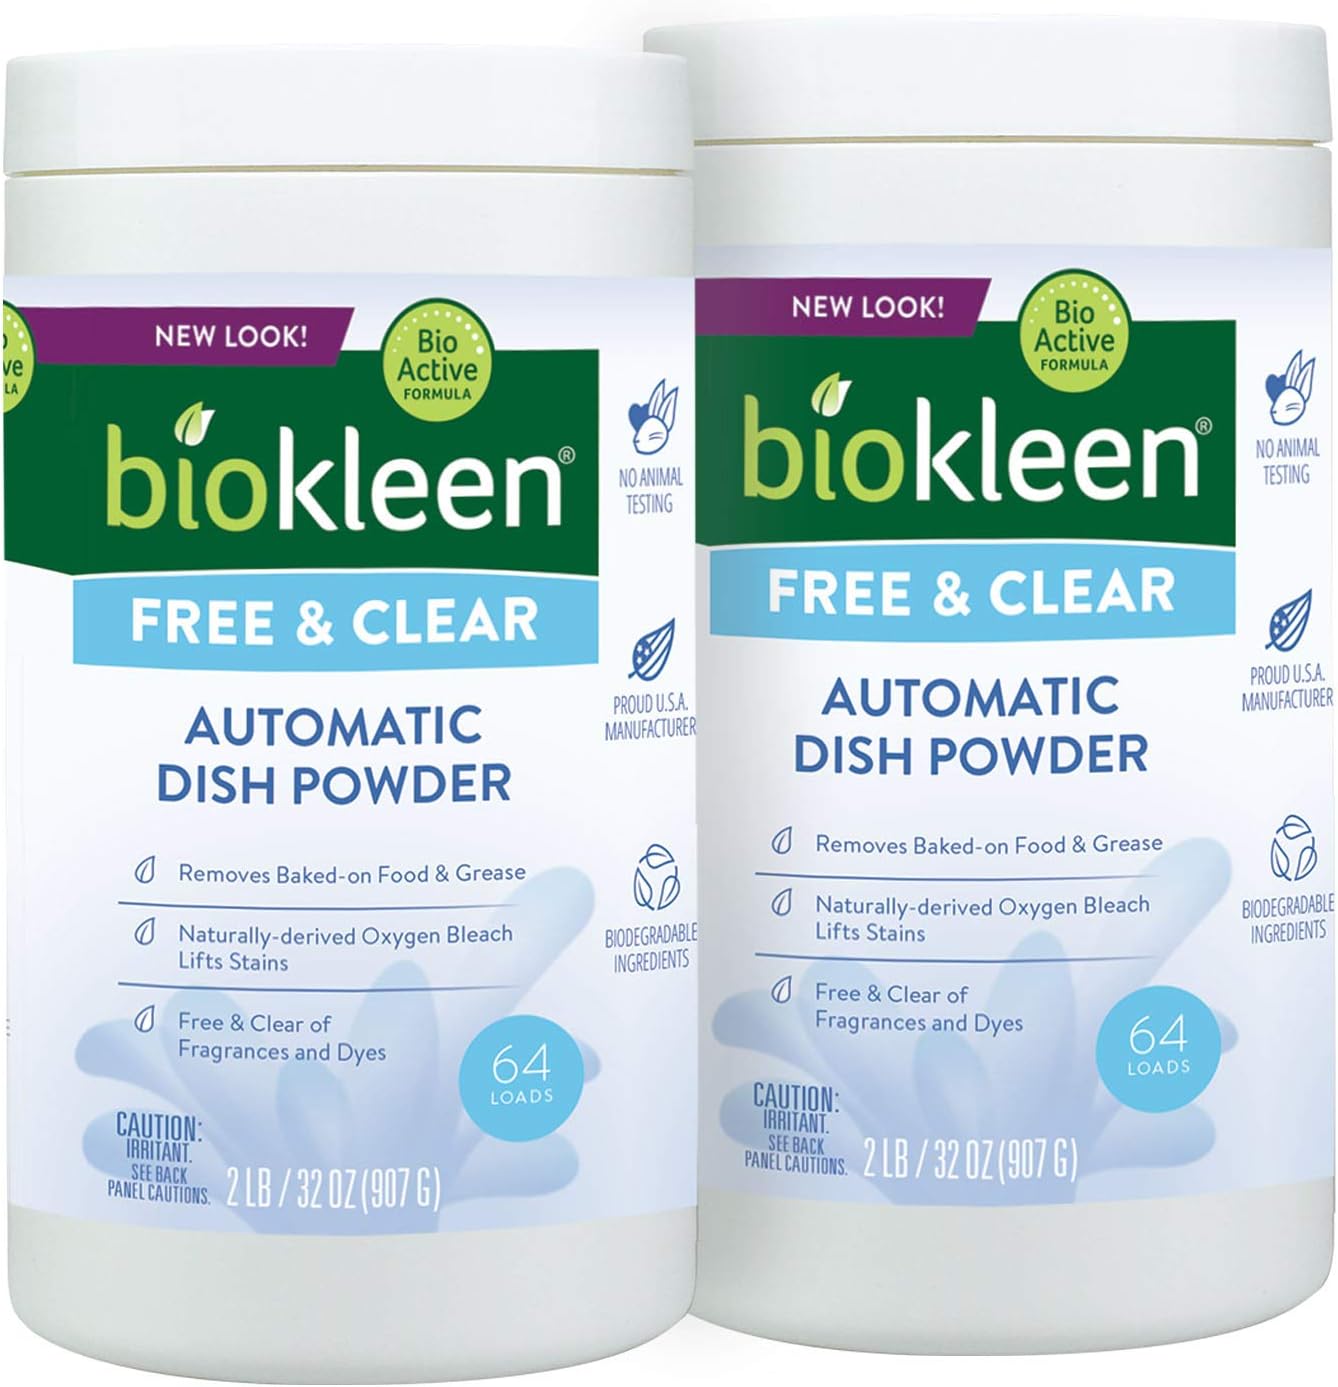 Biokleen Free & Clear Dishwashing Detergent Powder- 128 Loads - Concentrated, Phosphate & Chlorine Free, Eco-Friendly, No Artificial Fragrance, Colors or Preservatives